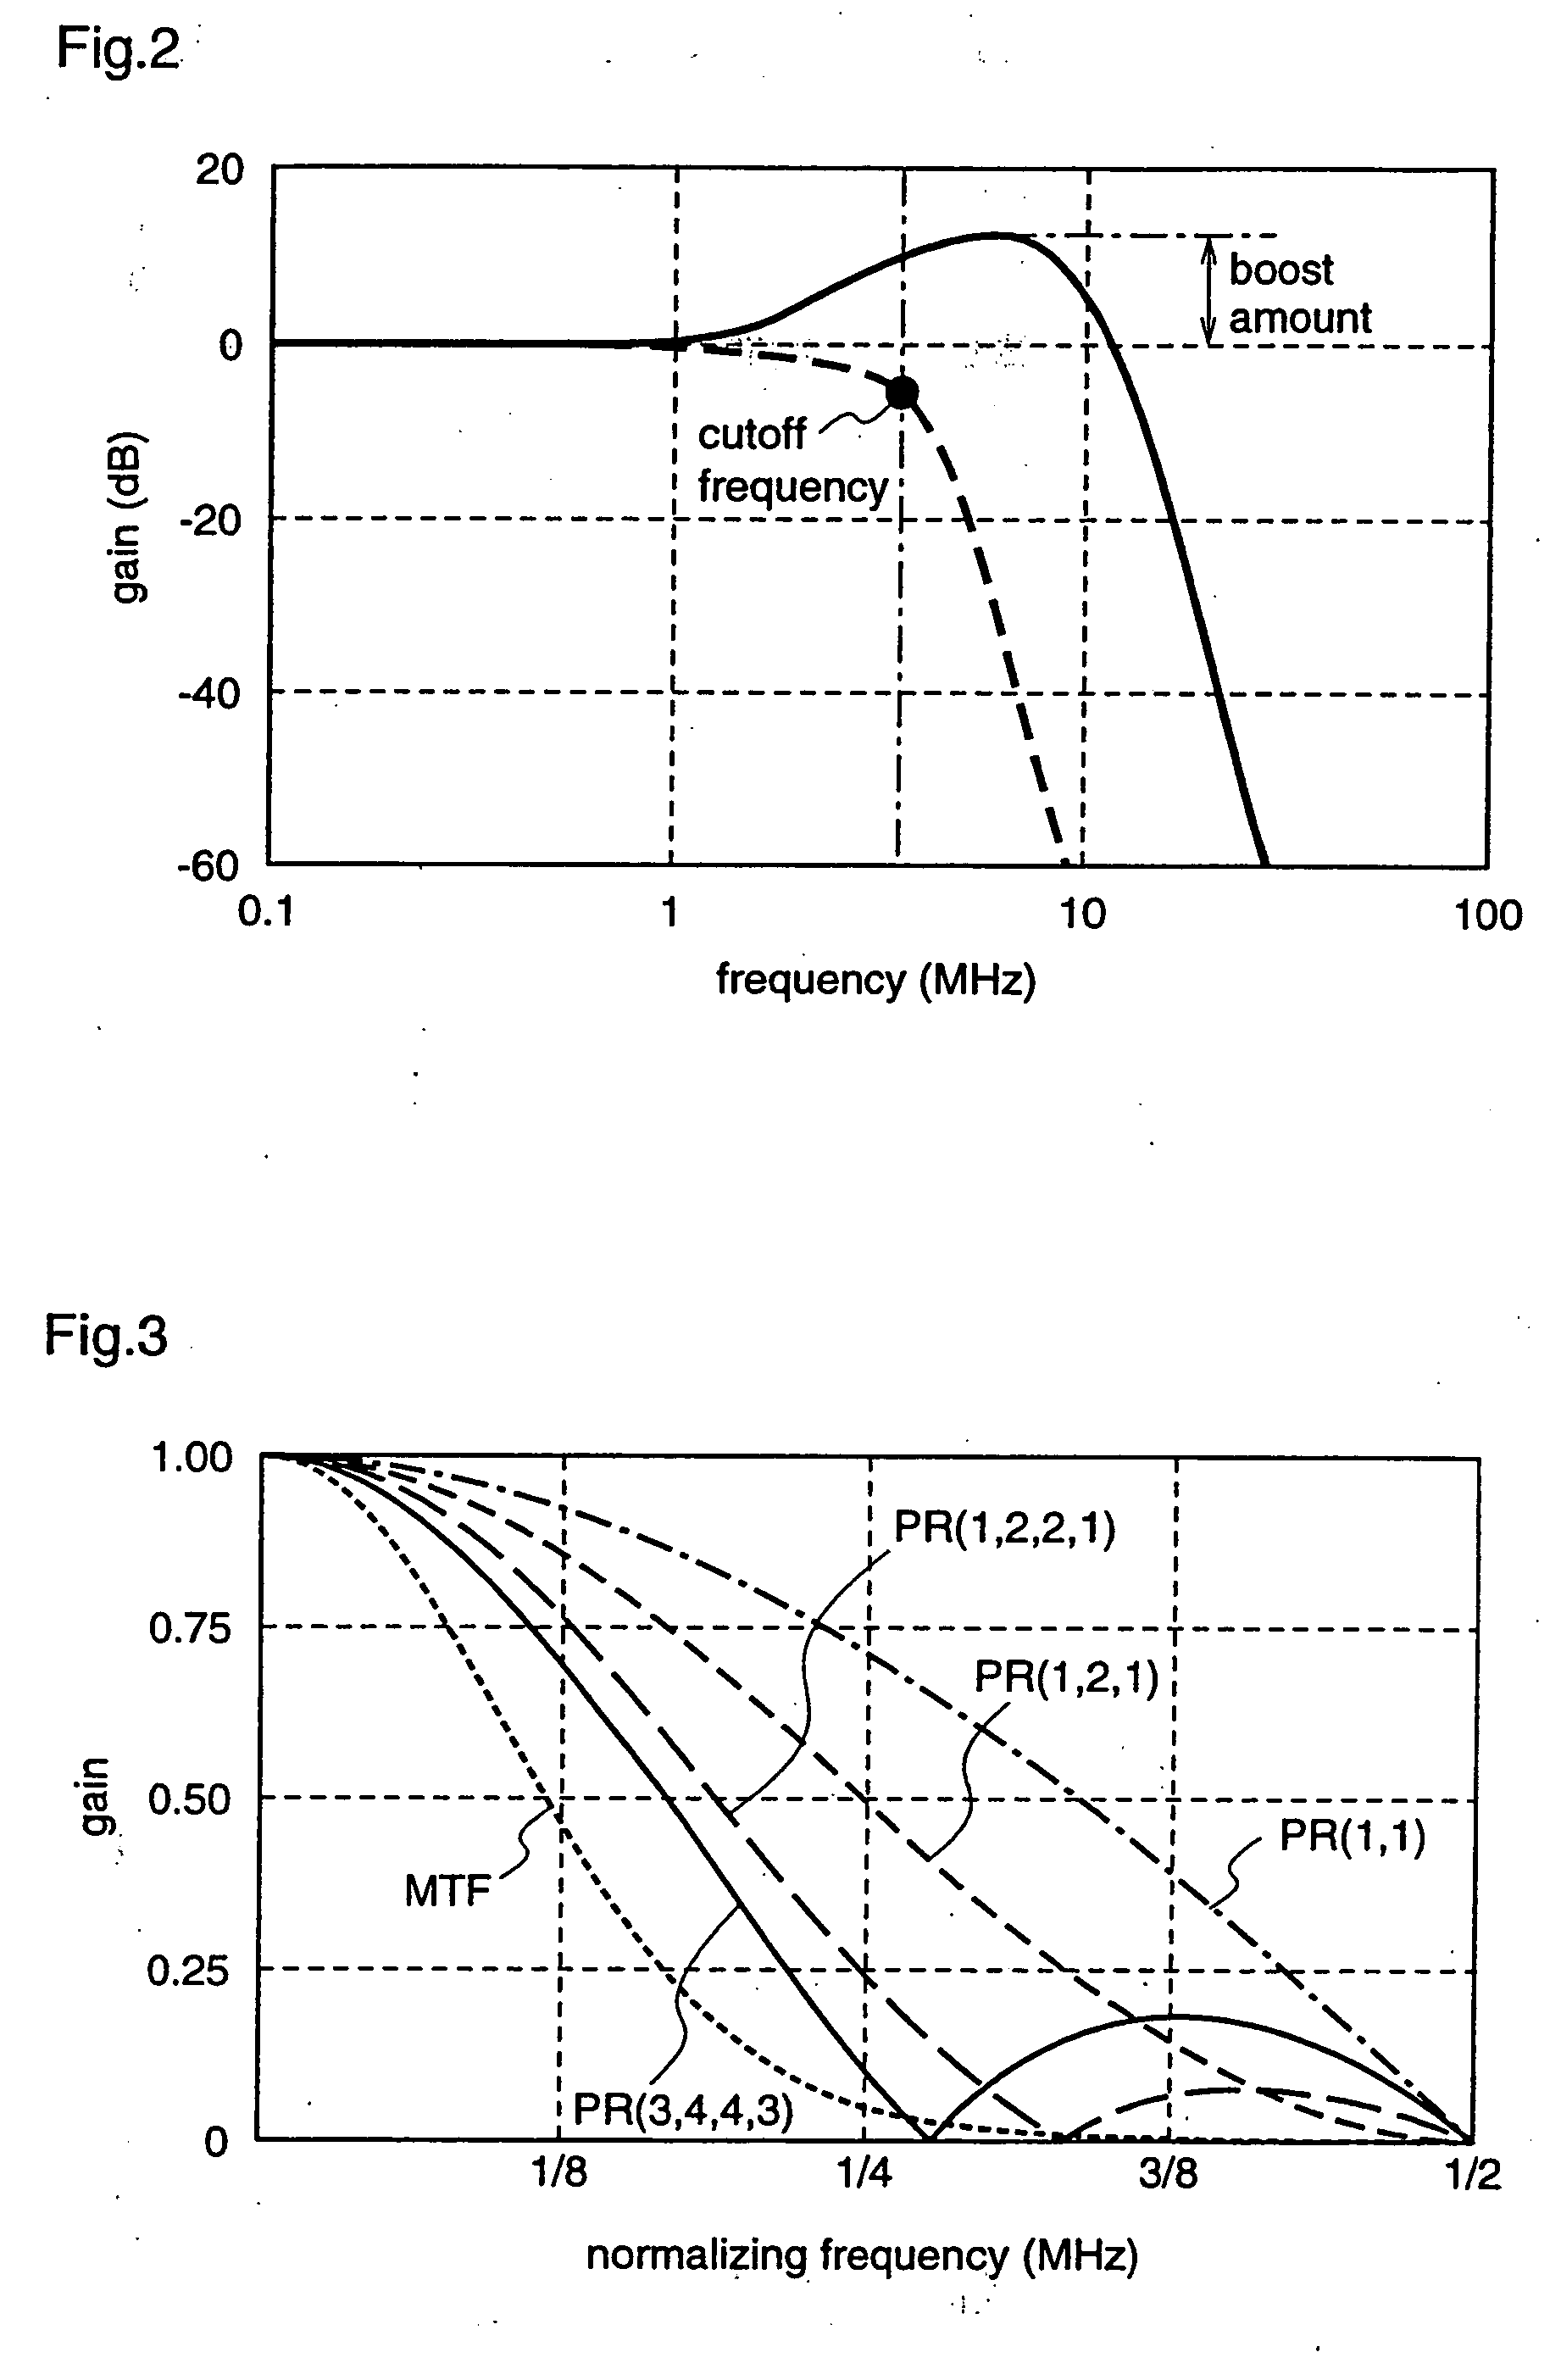 Optical disk reproducing device selectively using a channel bit frequency or a frequency that is half of the channel bit frequency